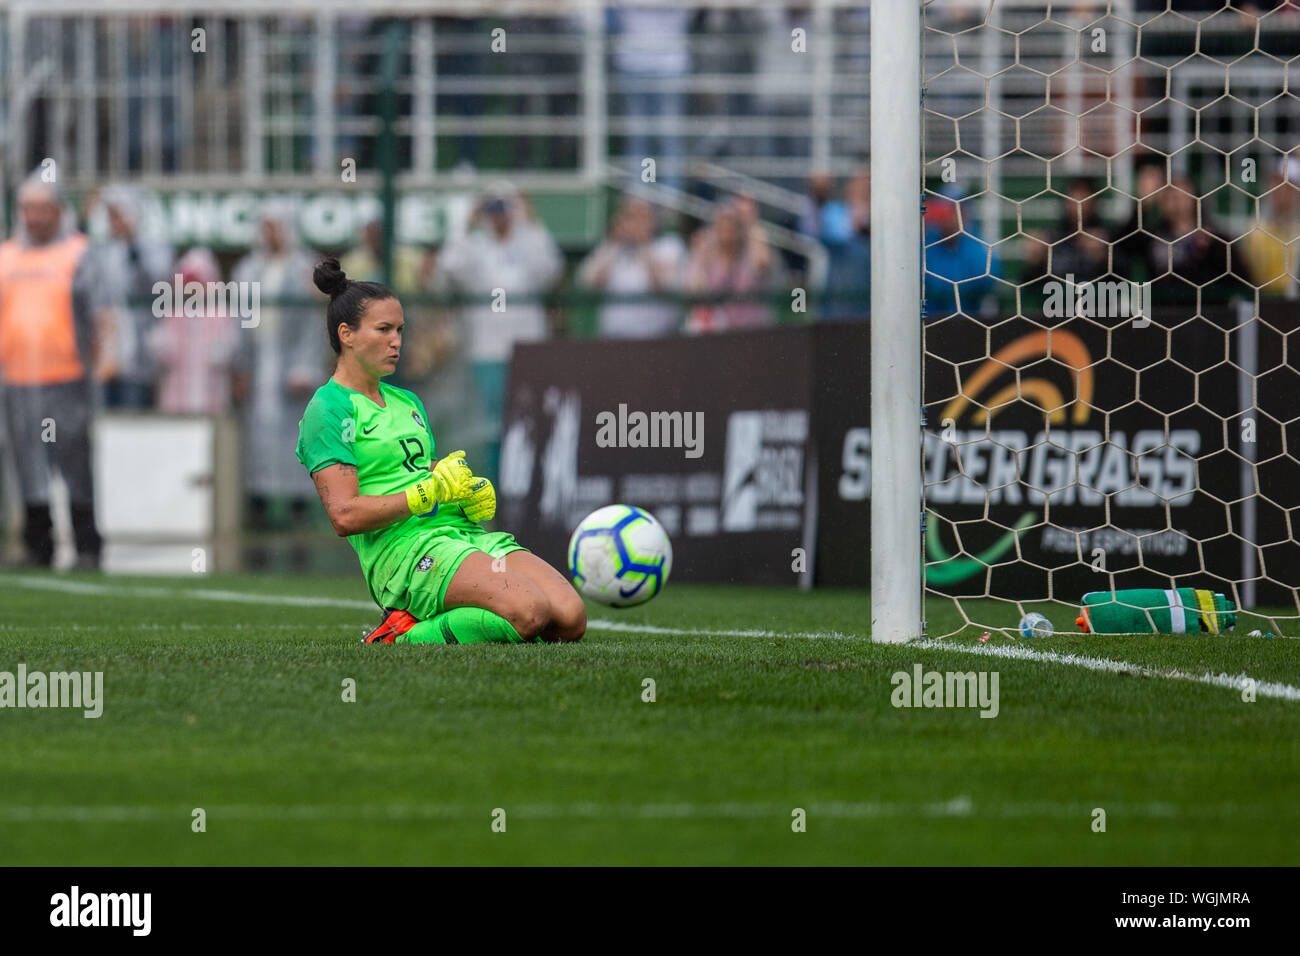 SÃO PAULO, SP - 01.09.2019: BRAZIL X CHILE - Goalkeeper Aline Reis during the penalty shootout that gave Chile the victory. Chilean team celebrates victory on penalties. Uber Women's Sr Cup Cup - Chilean national team wins the Brazilian women&# socteam onm on penalties after a 0-0 draw iaw in normal time. With t of rain, which disrupted the football of bof both teams, and with audience of 15,047 paying and income of $ 174,073.00. The match took place this Sunday, September 1st, 2019, at Pacaembu Stadium, in São Paulo. (Photo: Van Campos/Fotoarena) Stock Photo